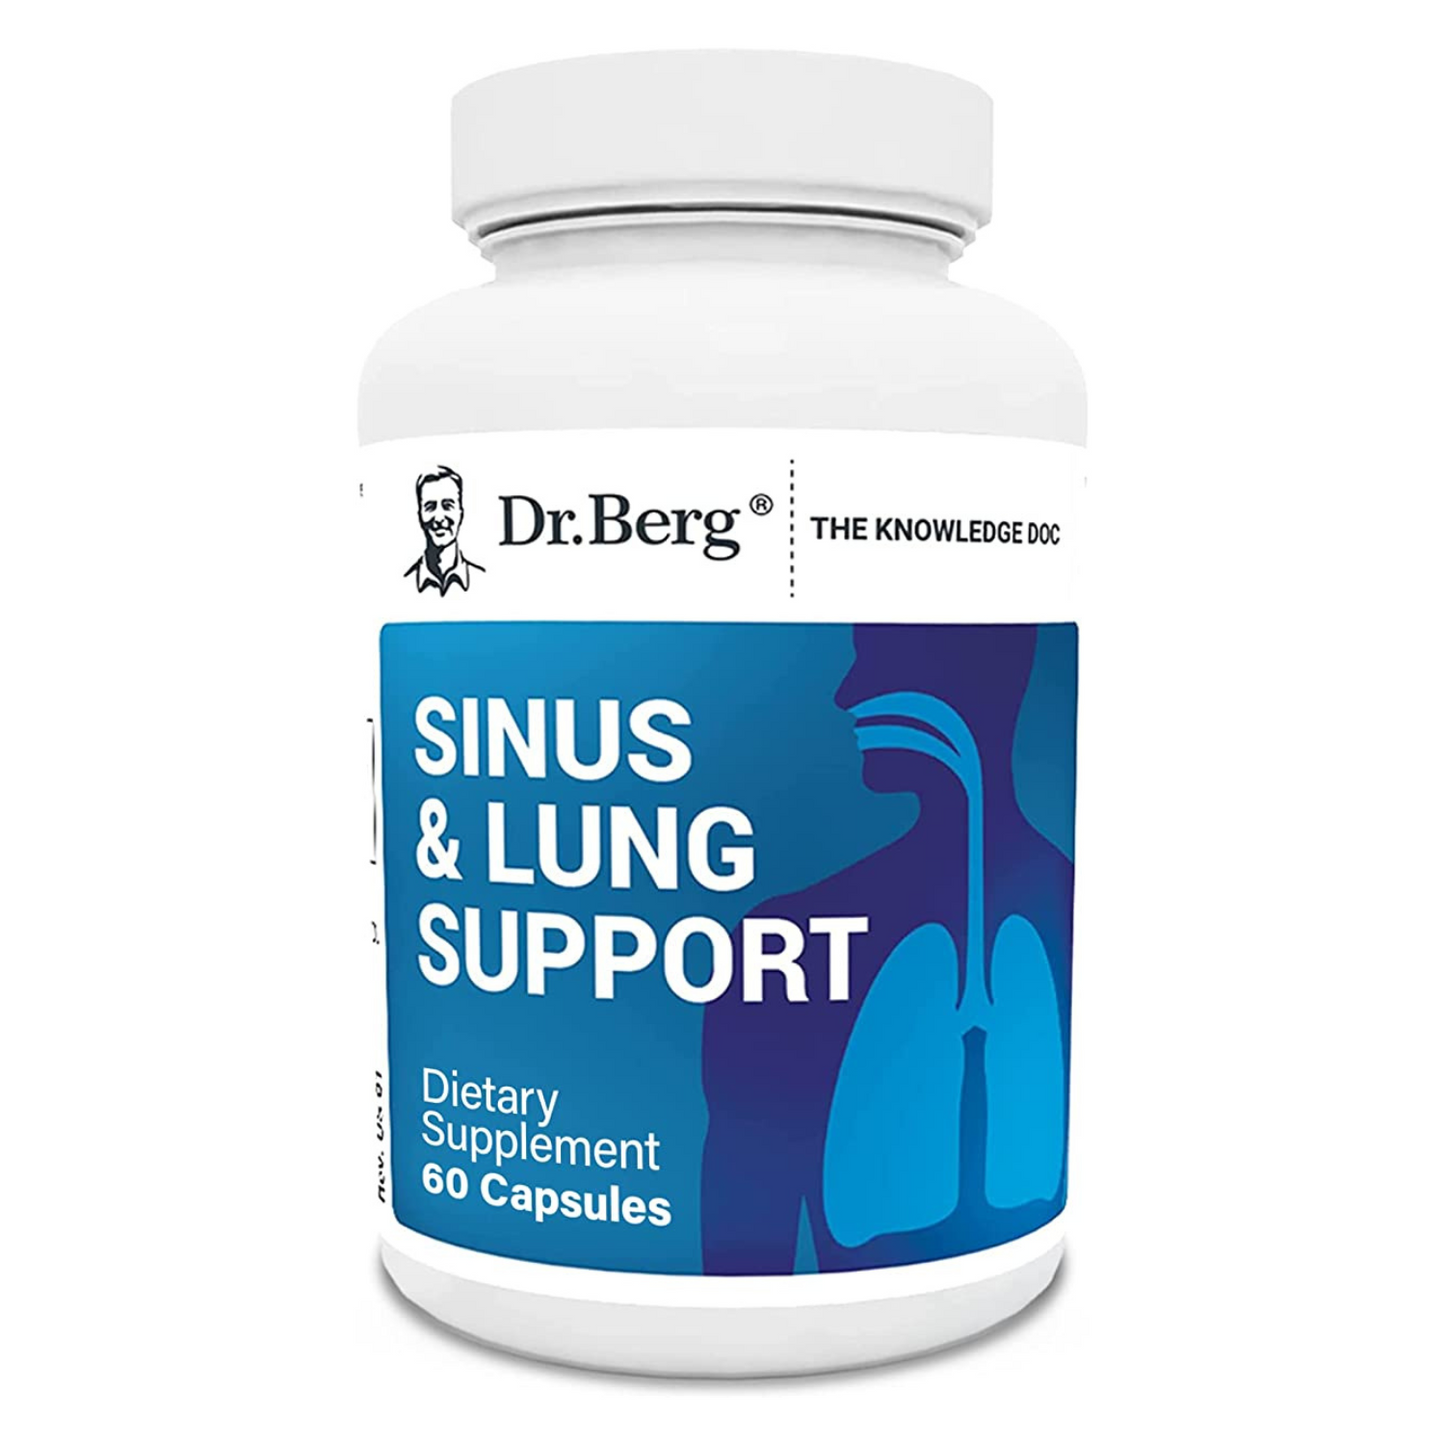 Dr. Berg -  Sinus & Lung Support Supplement - 60 Capsules